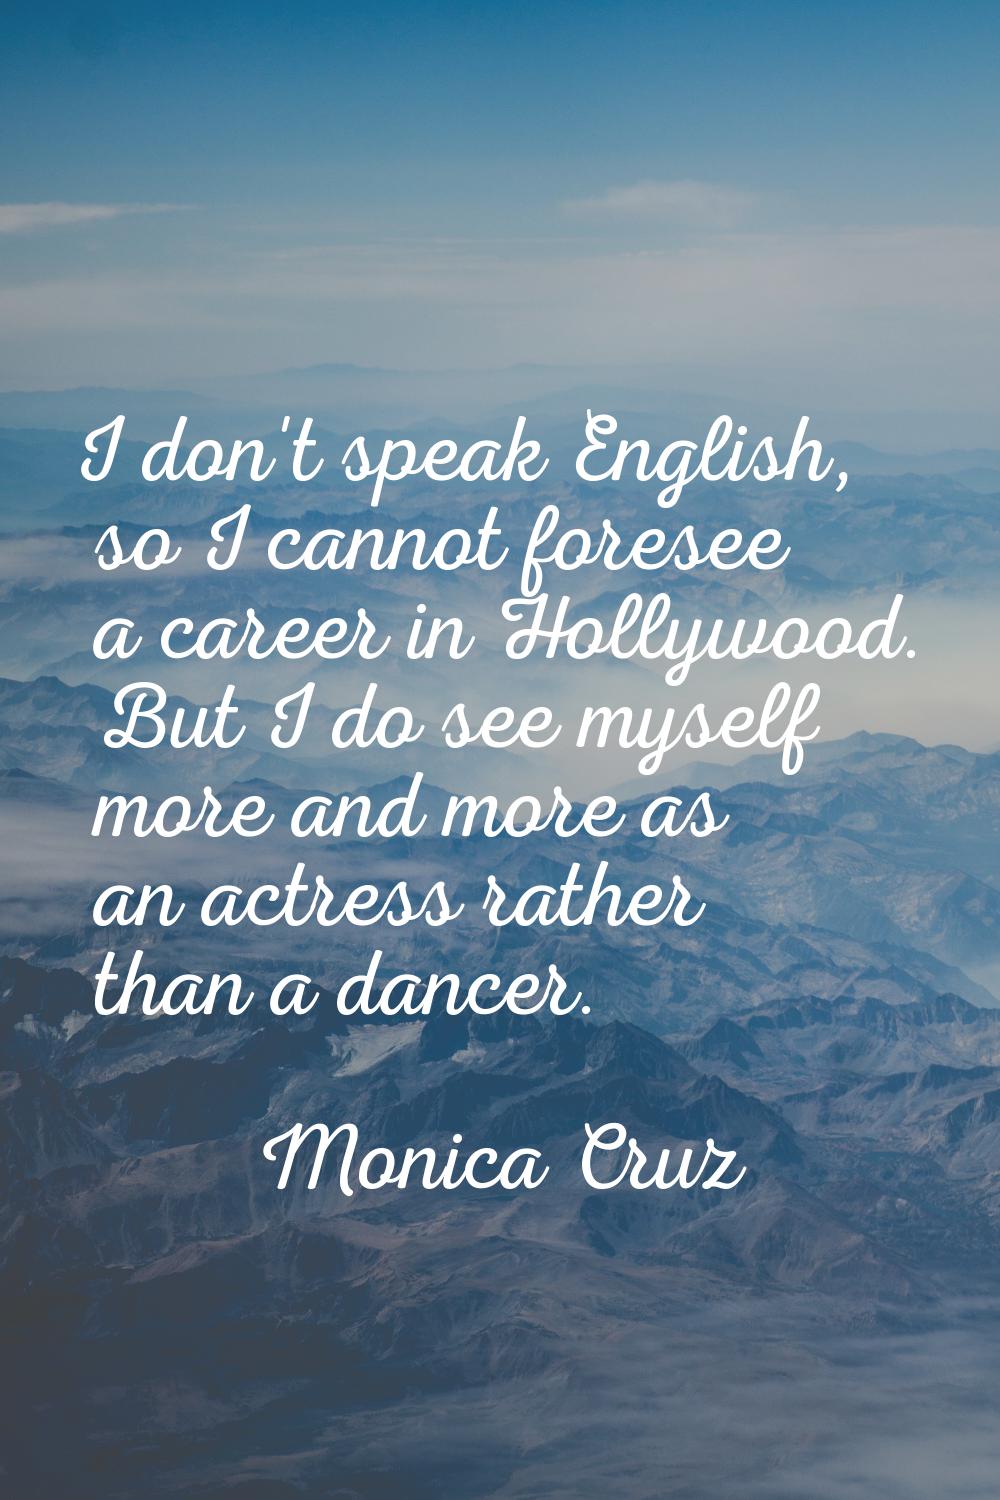 I don't speak English, so I cannot foresee a career in Hollywood. But I do see myself more and more